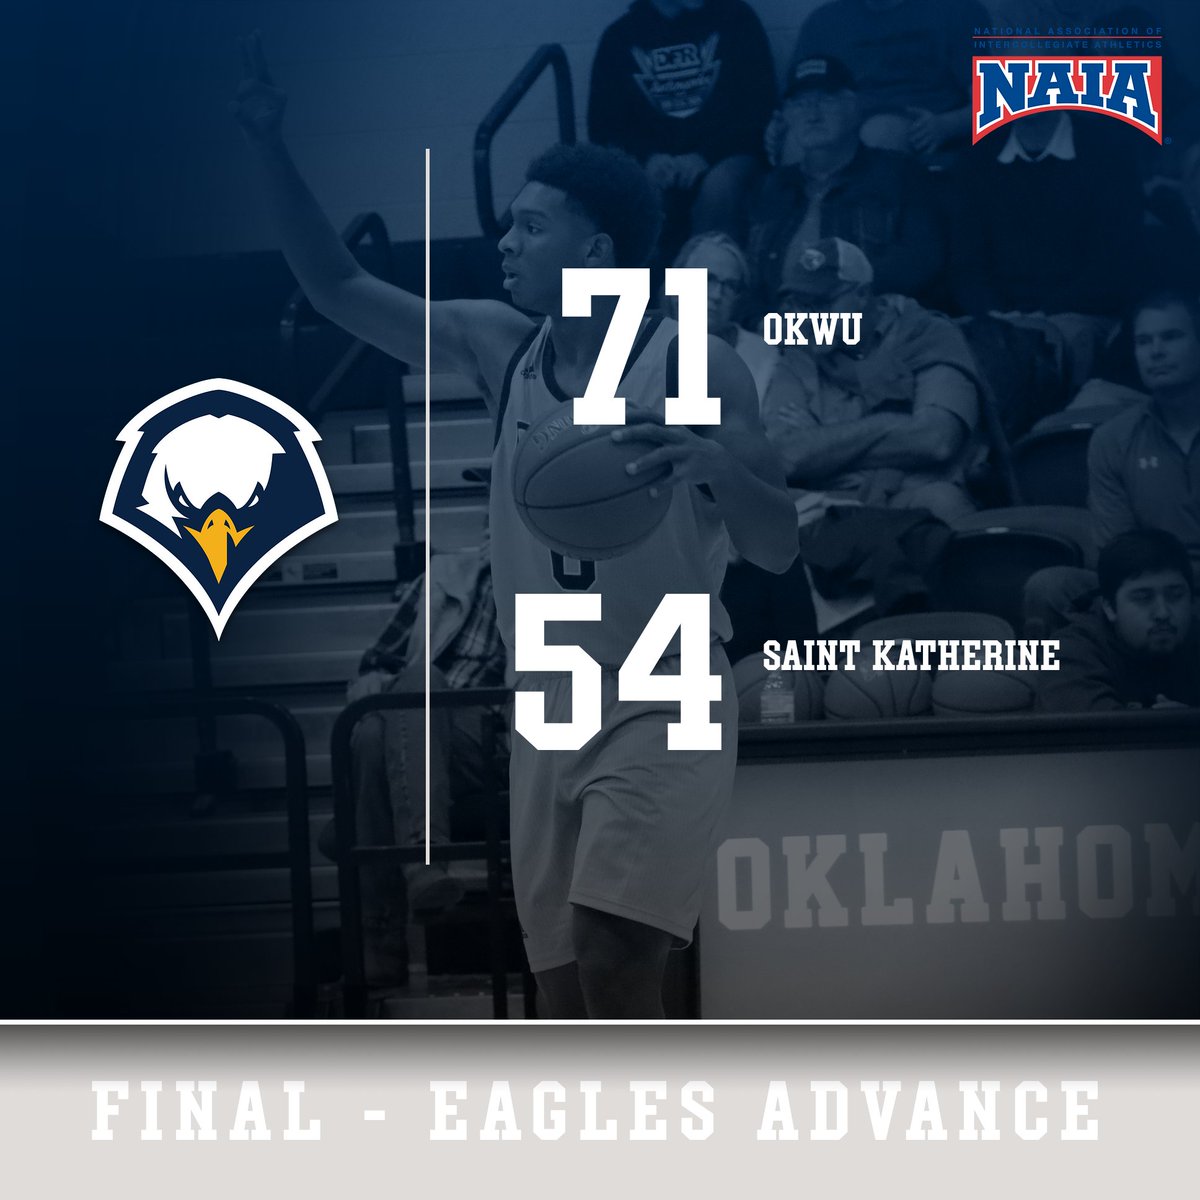 One down! @OKWUeagles_MBB win in NAIA Opening Round Game, beating Saint Katherine (Calif.) 71-54. Jaden Lietzke led the way for the Eagles with 24 points. #NAIAOpeningRound